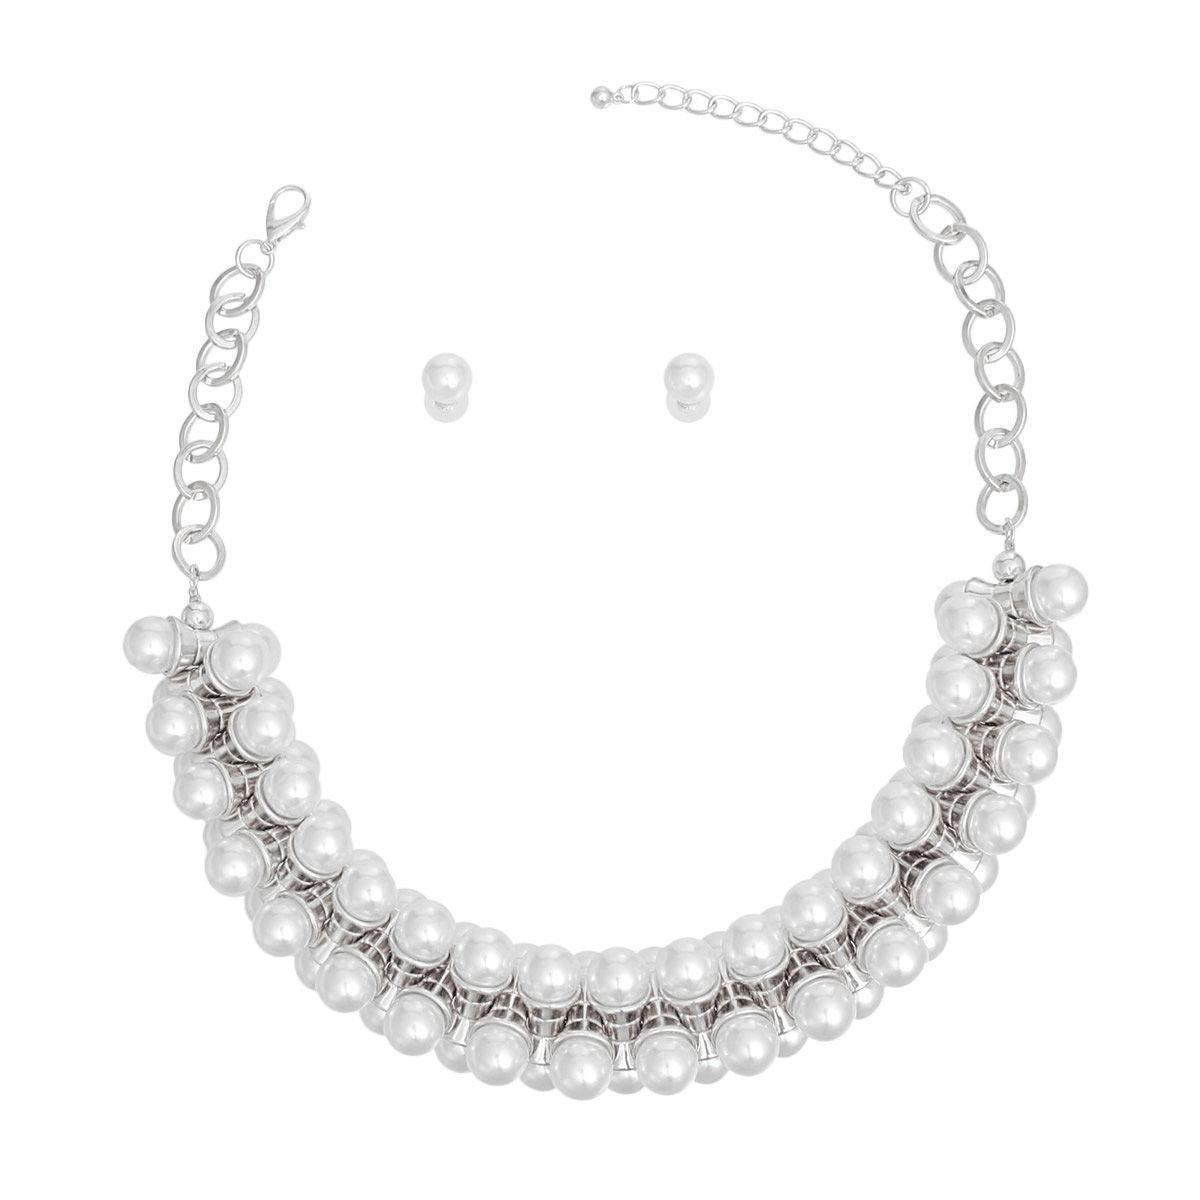 Exquisite Silver White Pearl Necklace Set: Blend of Elegance & Style